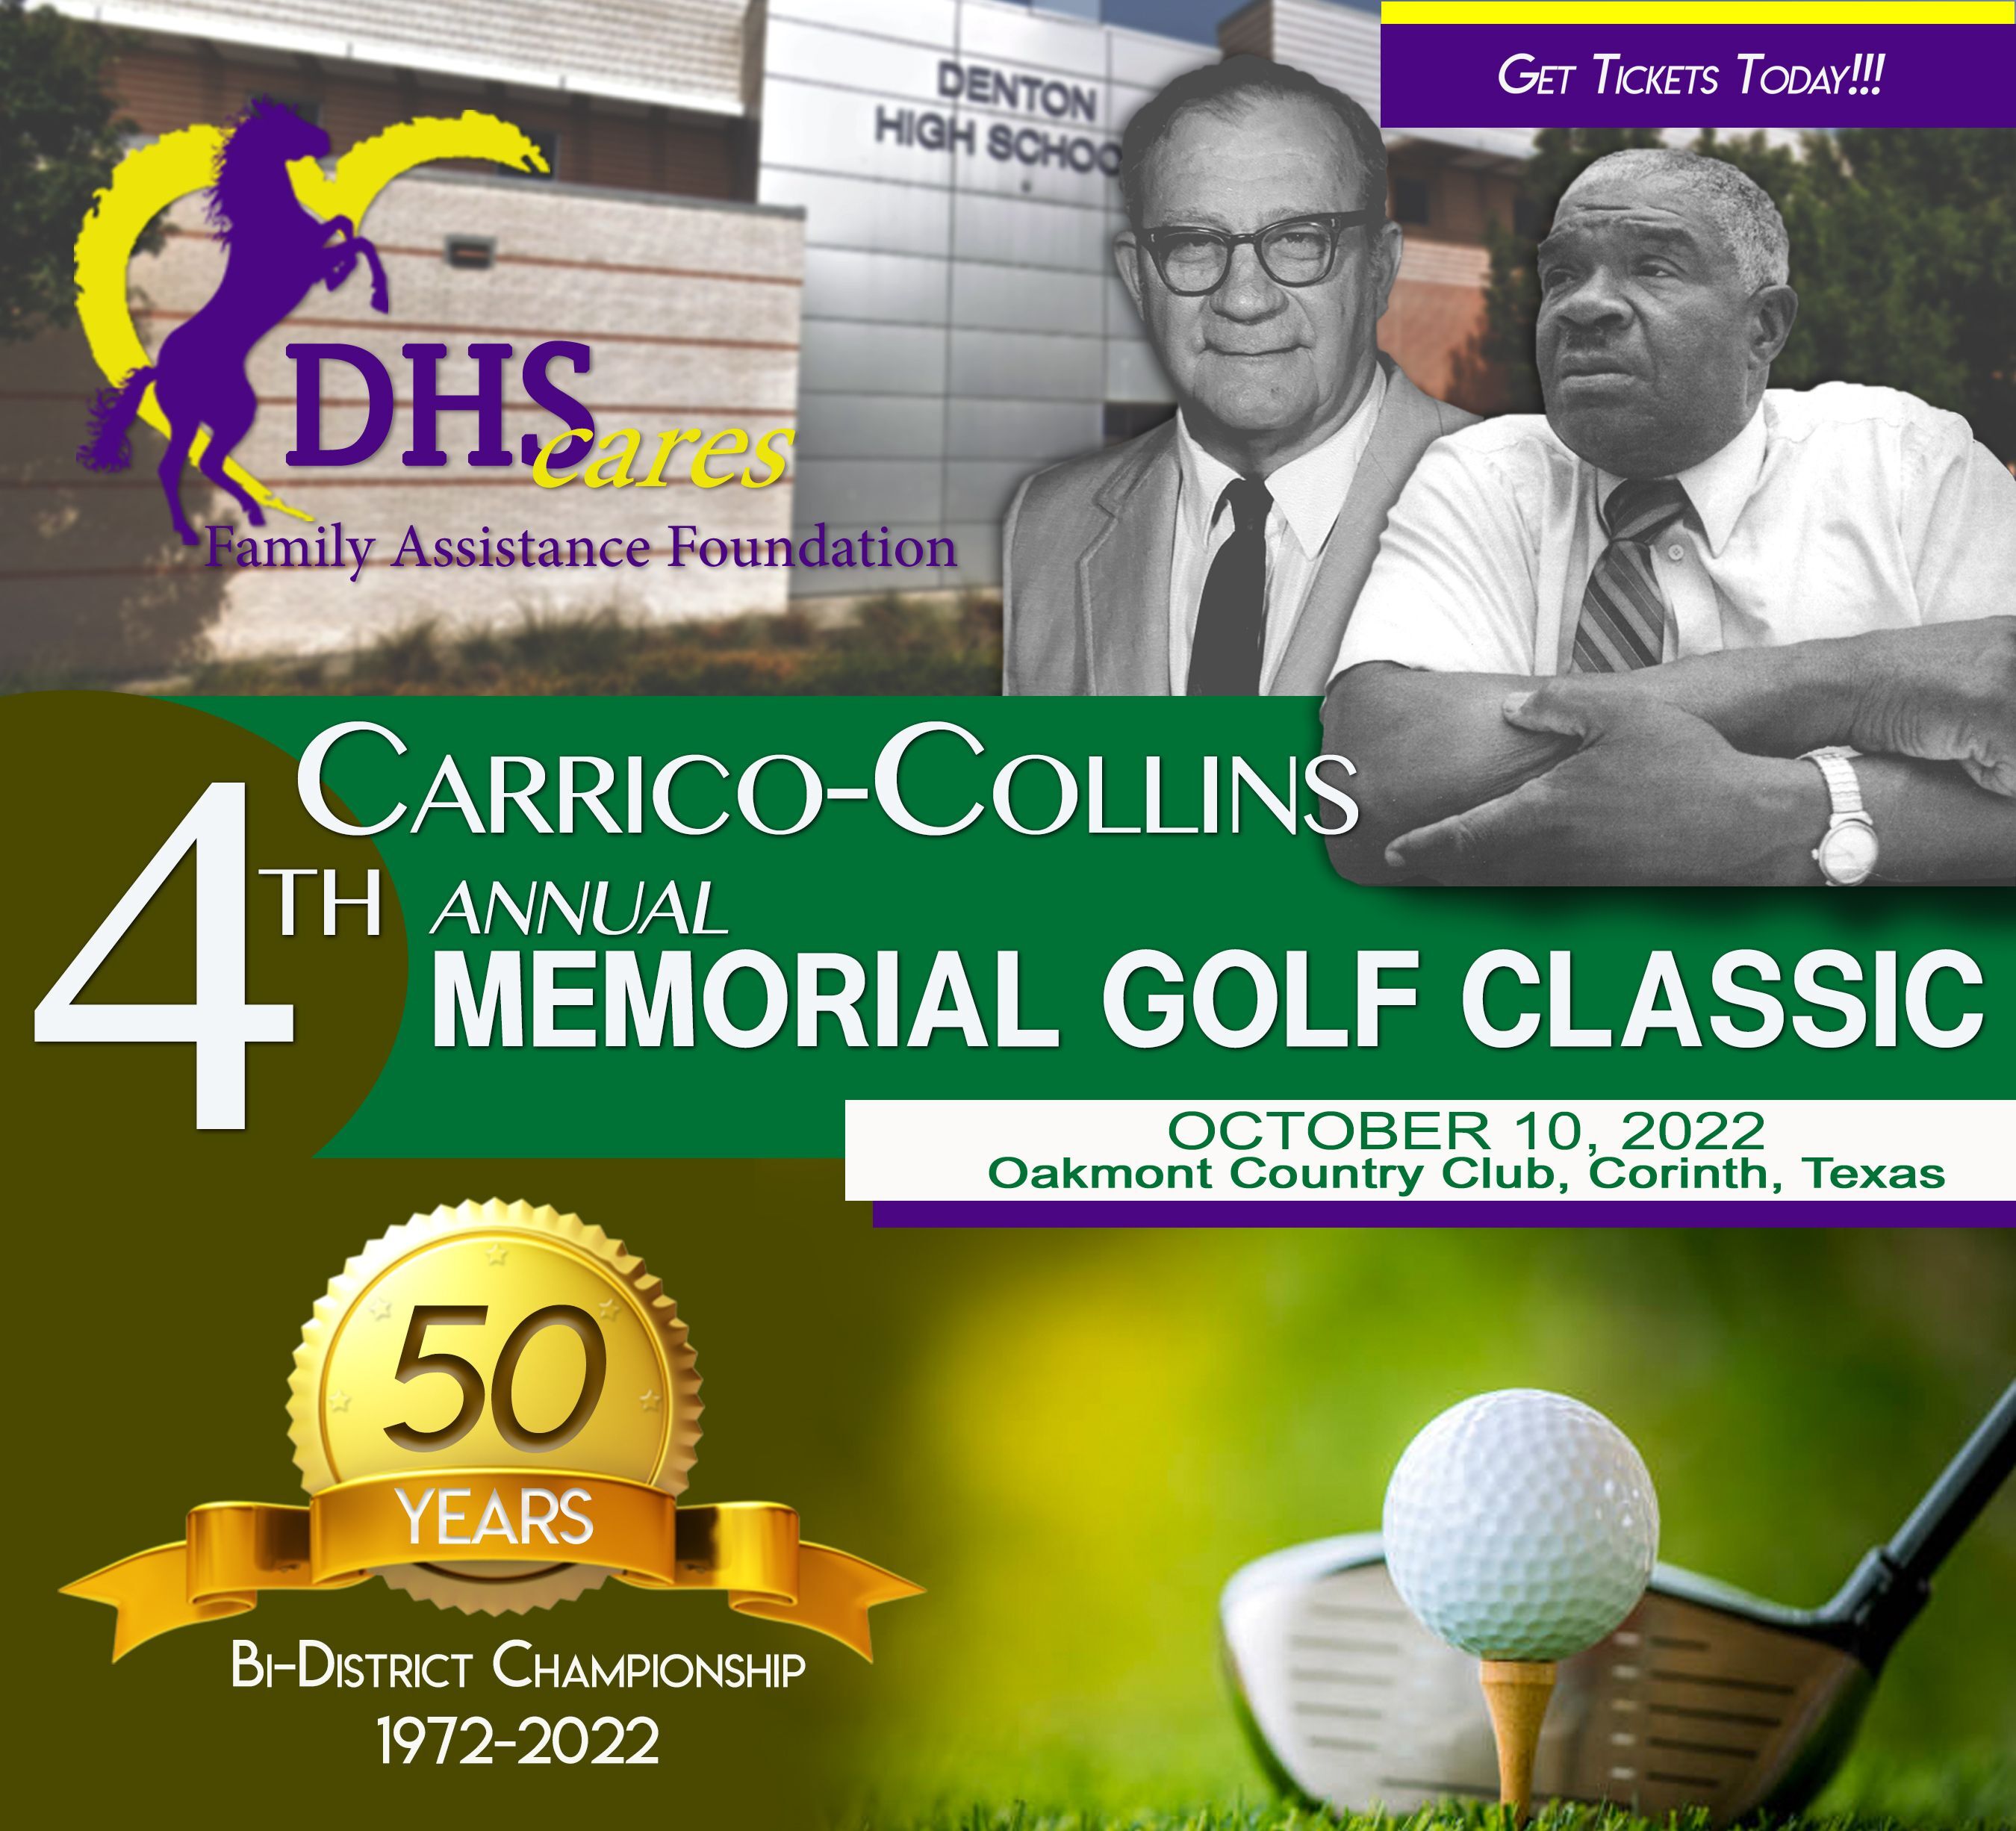 Denton High Cares presents the Fourth Annual Carrico/Collins Memorial Weekend